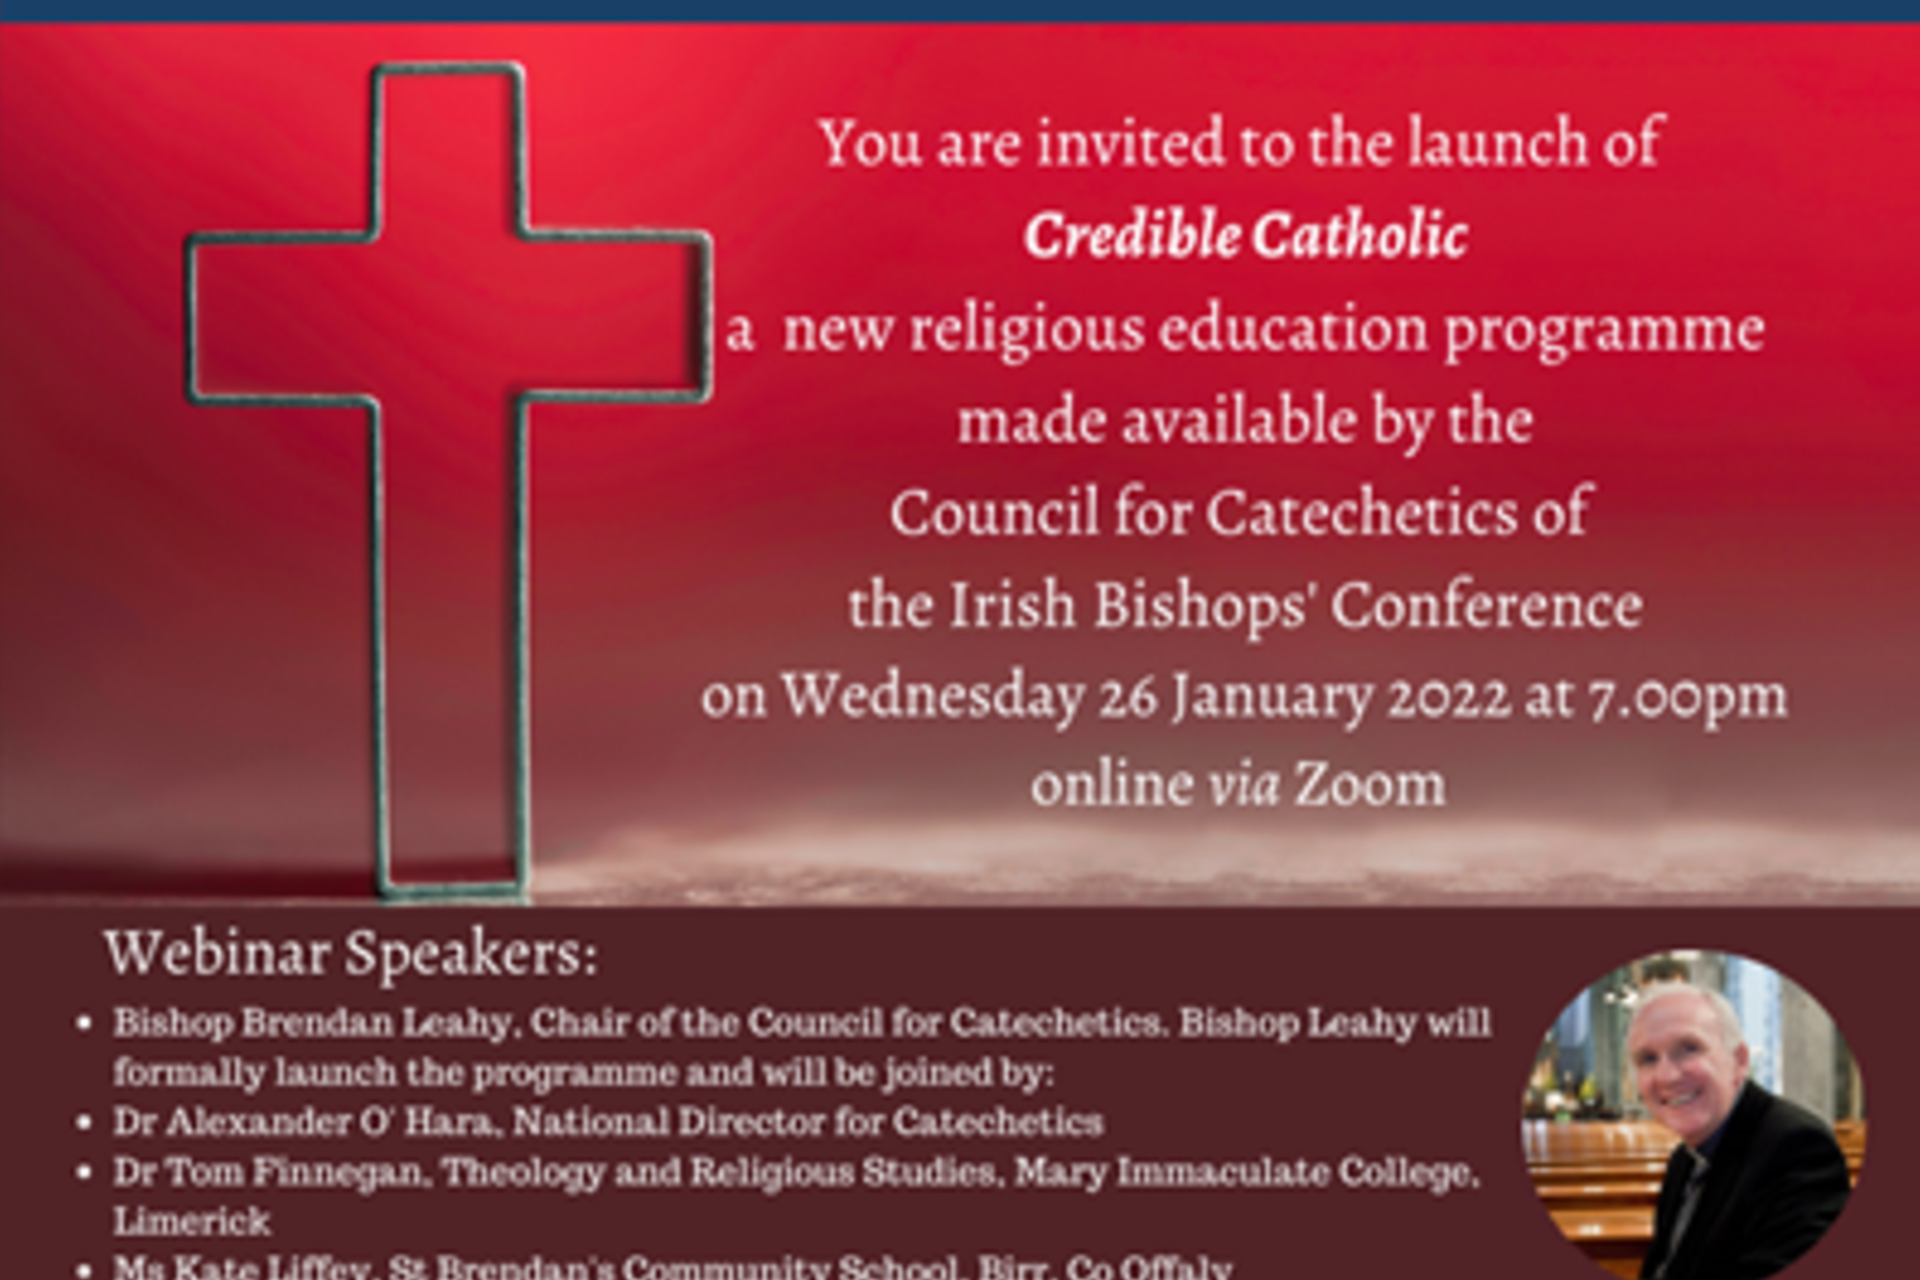 Bishop Brendan Leahy to launch Credible Catholic religious education programme